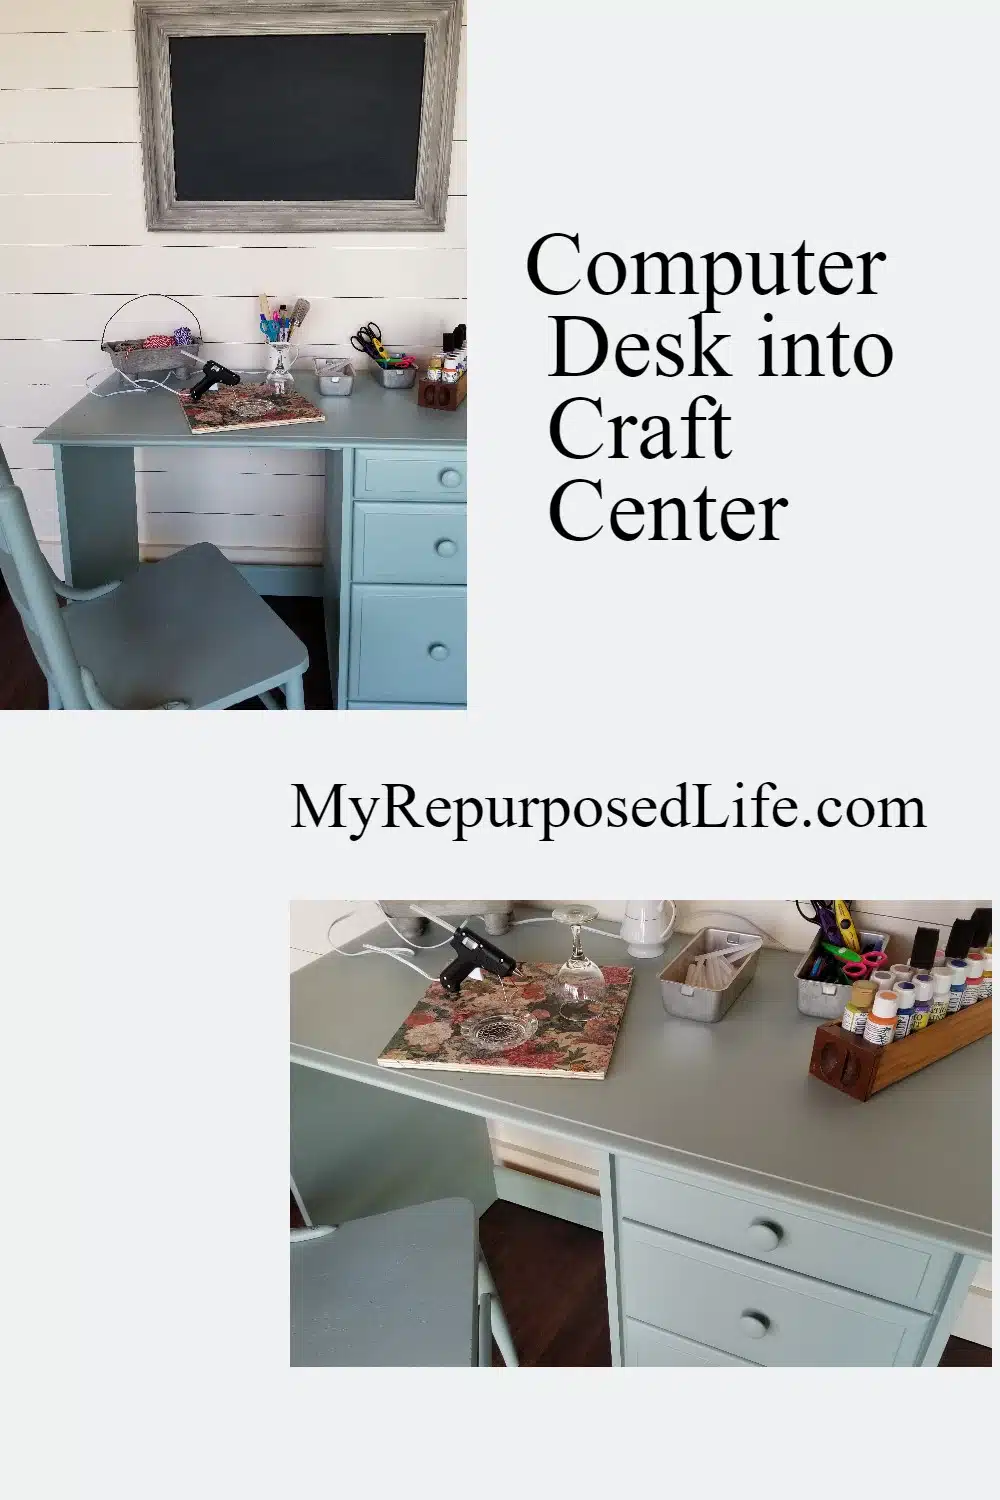 How to do a quick and easy makeover on an old keyboard computer desk turning it into a new and useful craft desk! #MyRepurposedLife via @repurposedlife